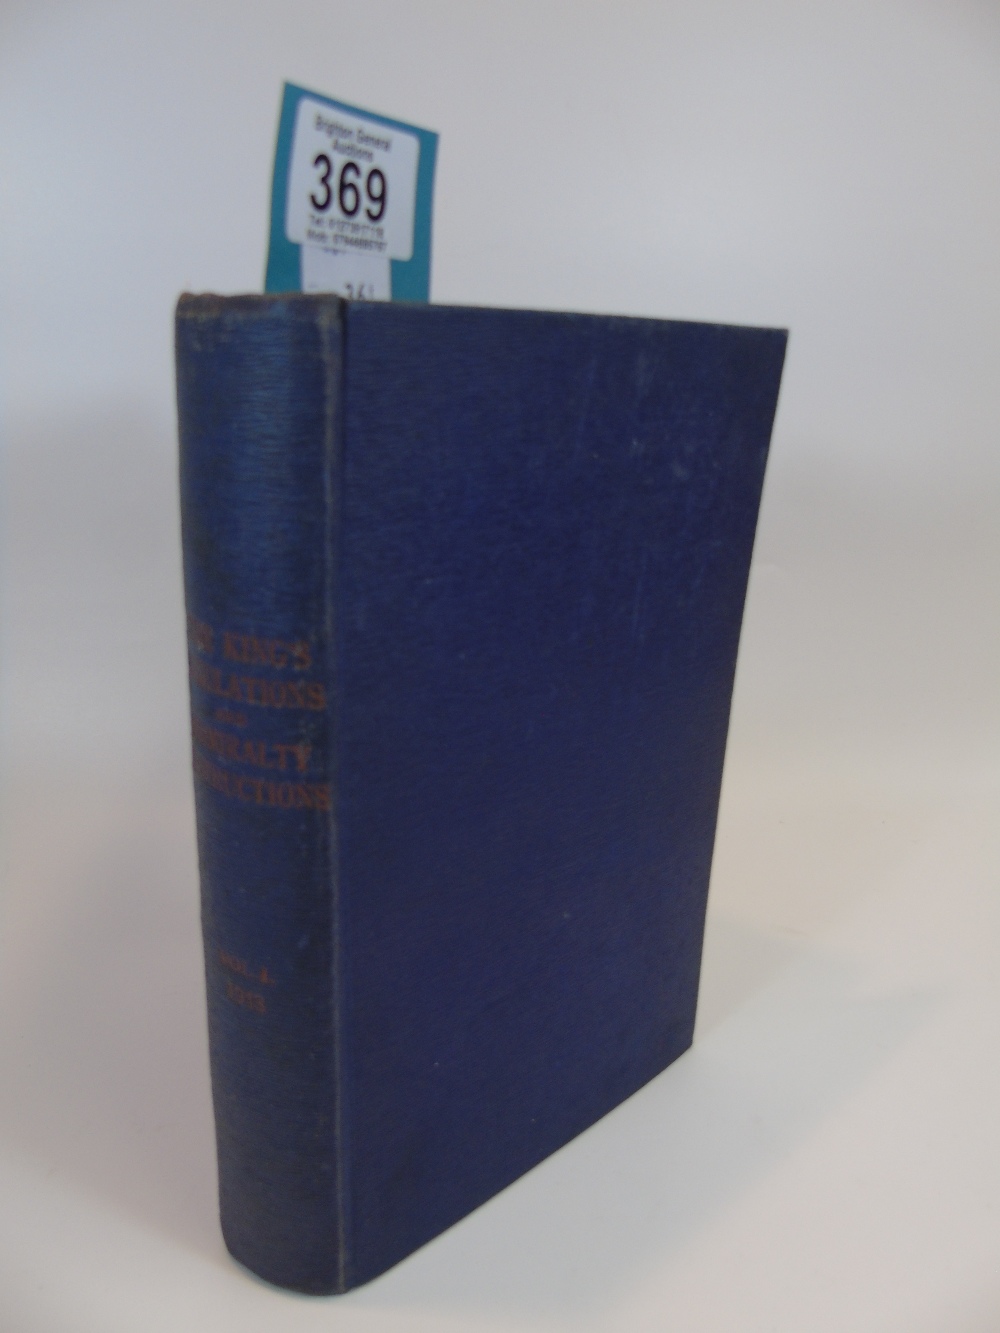 'THE KINGS REGULATIONS & ADMIRALTY INSTRUCTIONS 1913